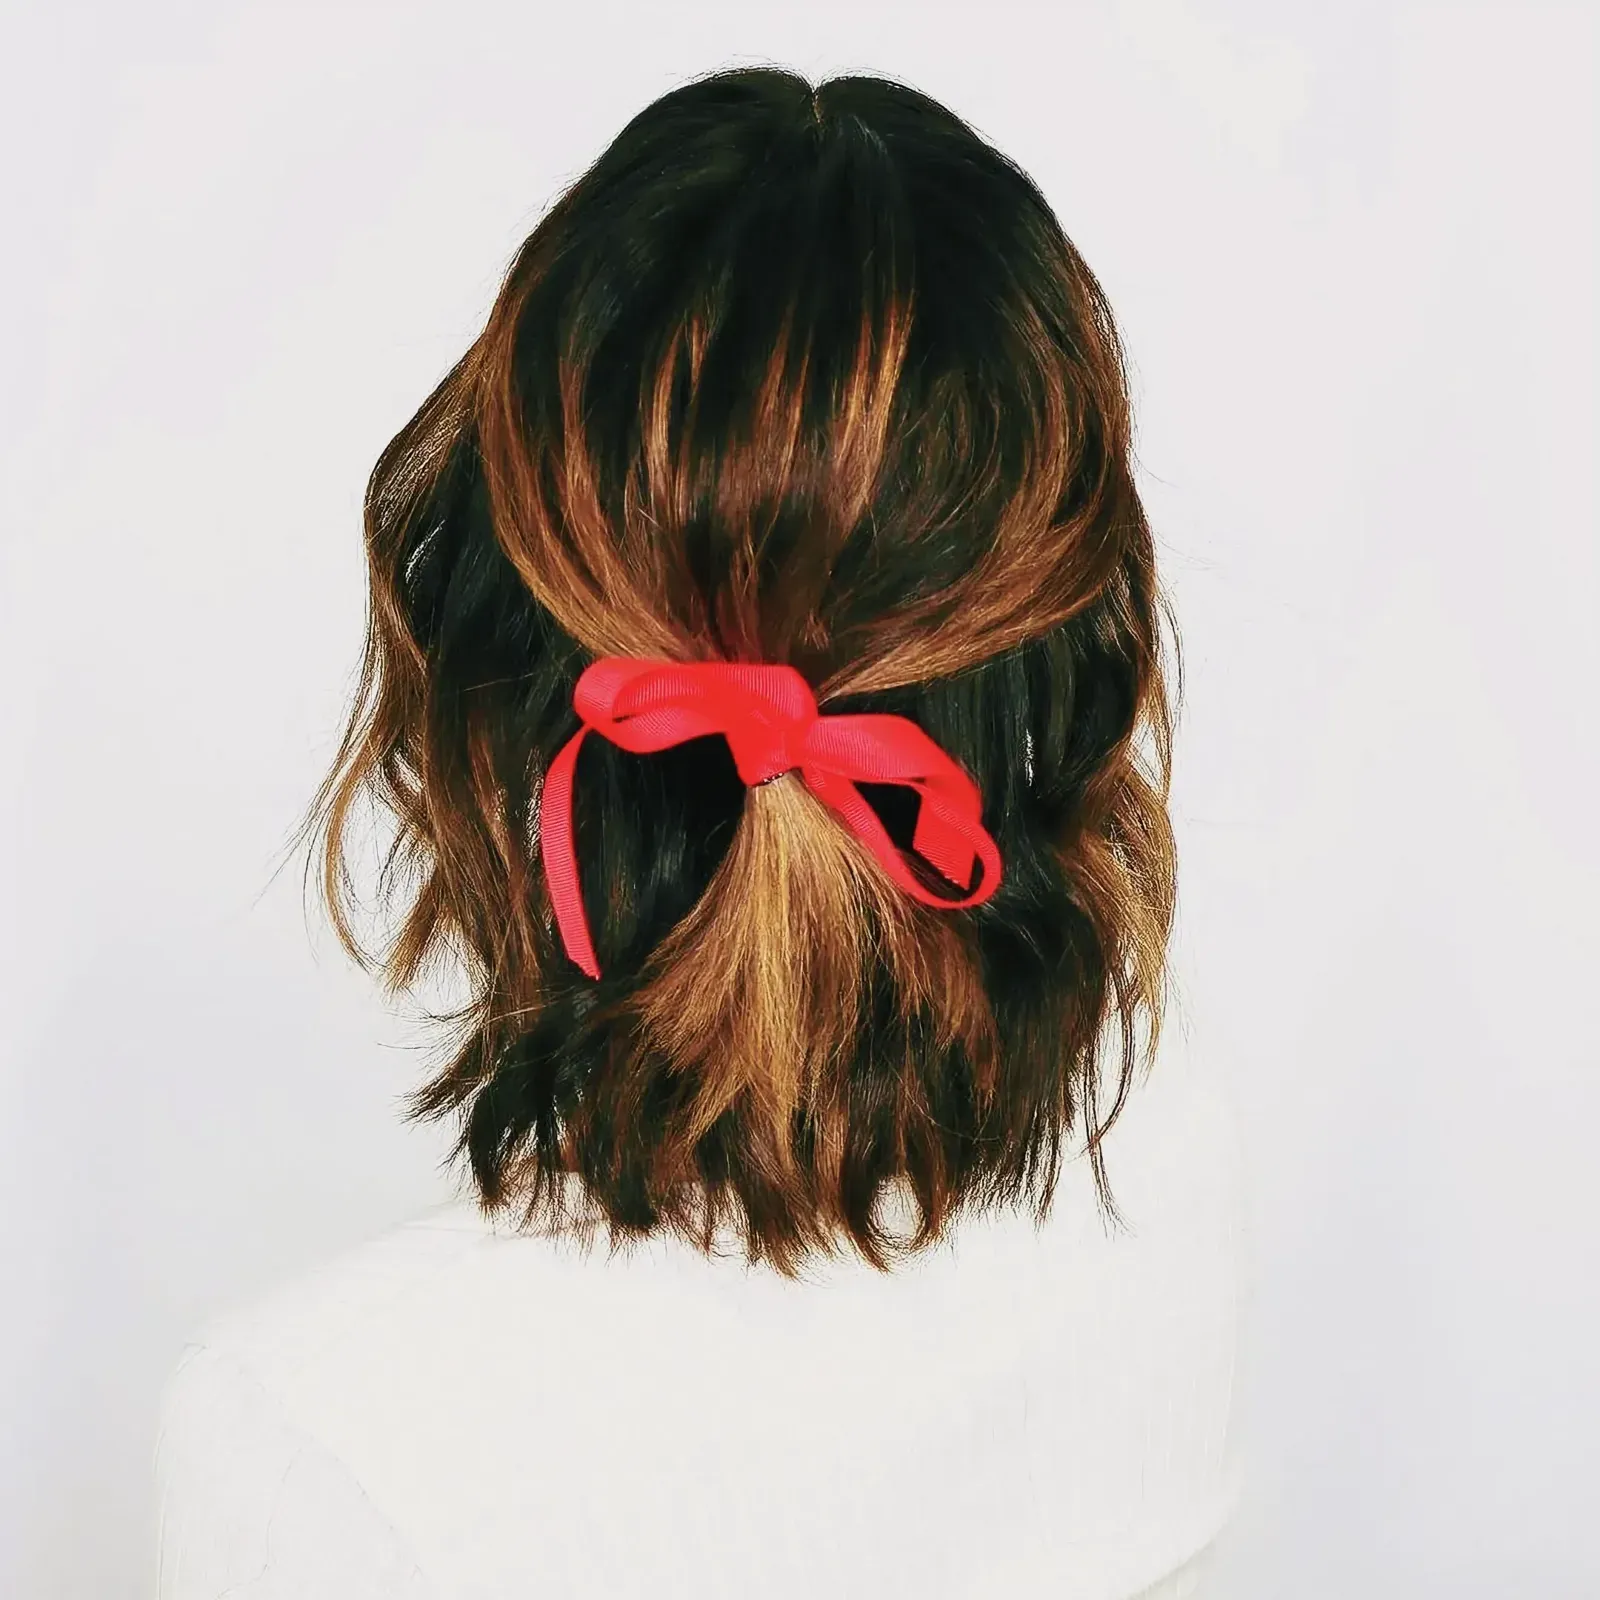 Stylish woman with vibrant red bow in her hair